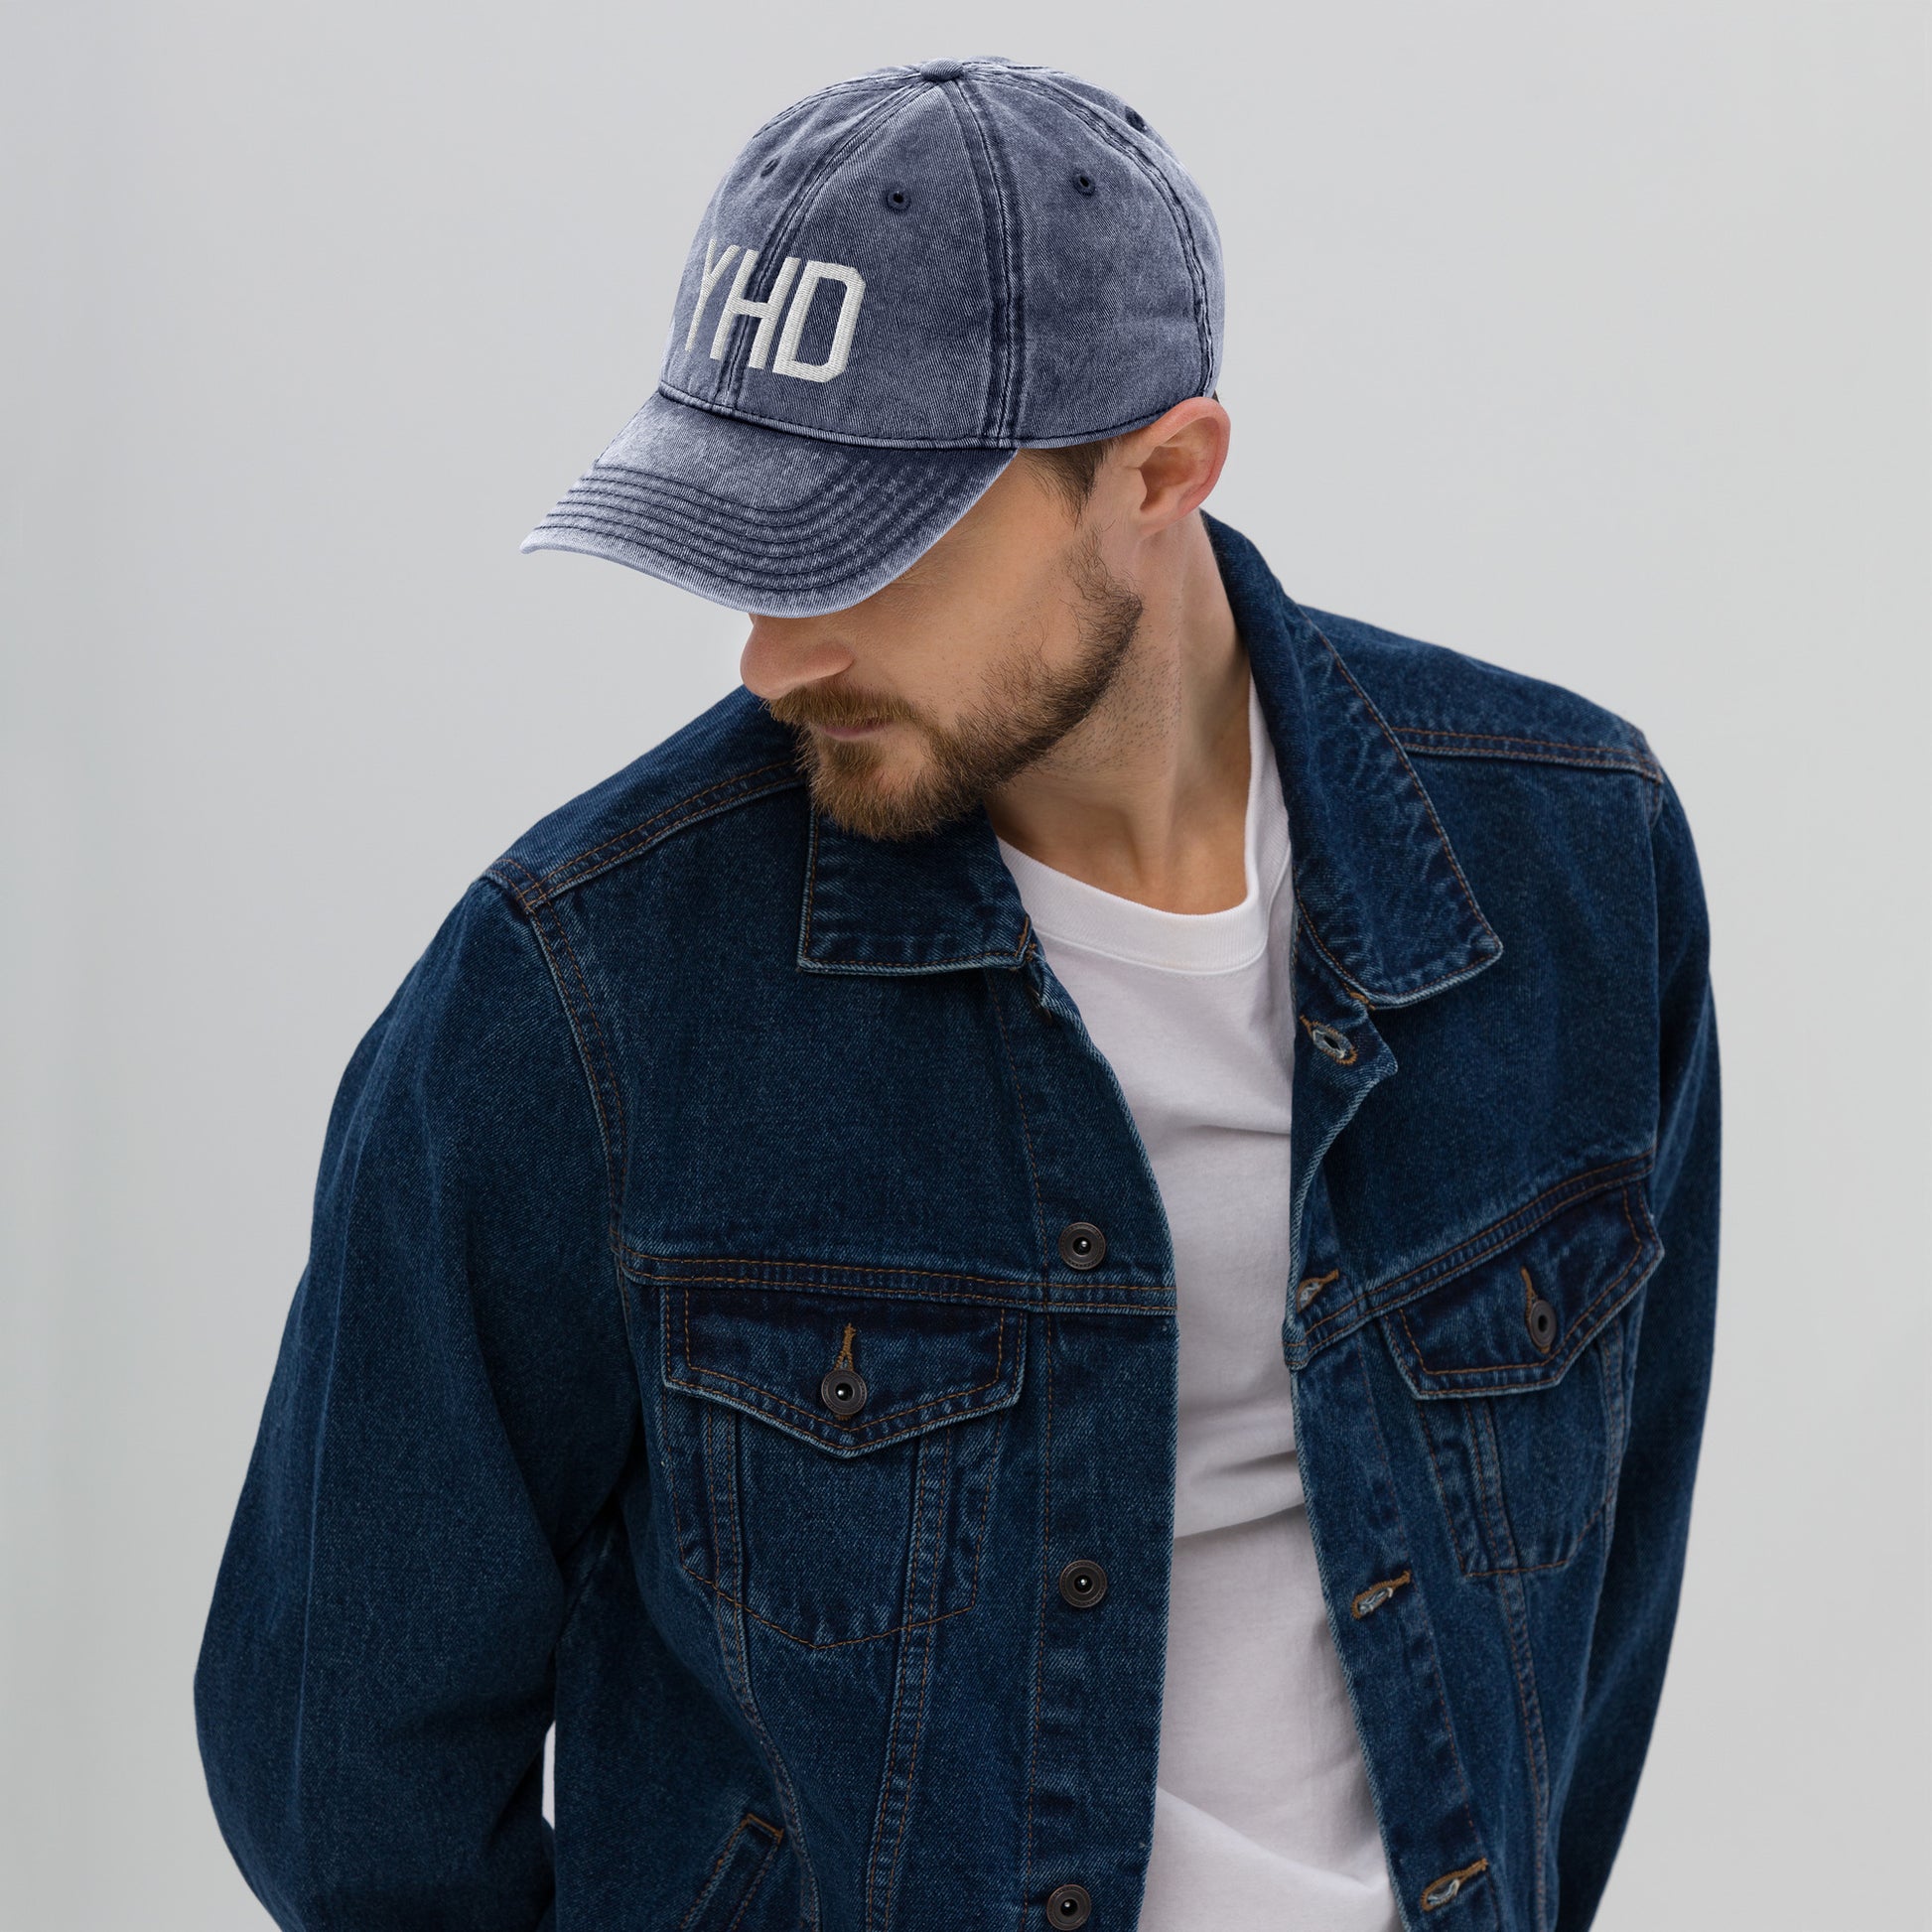 Airport Code Twill Cap - White • YHD Dryden • YHM Designs - Image 04